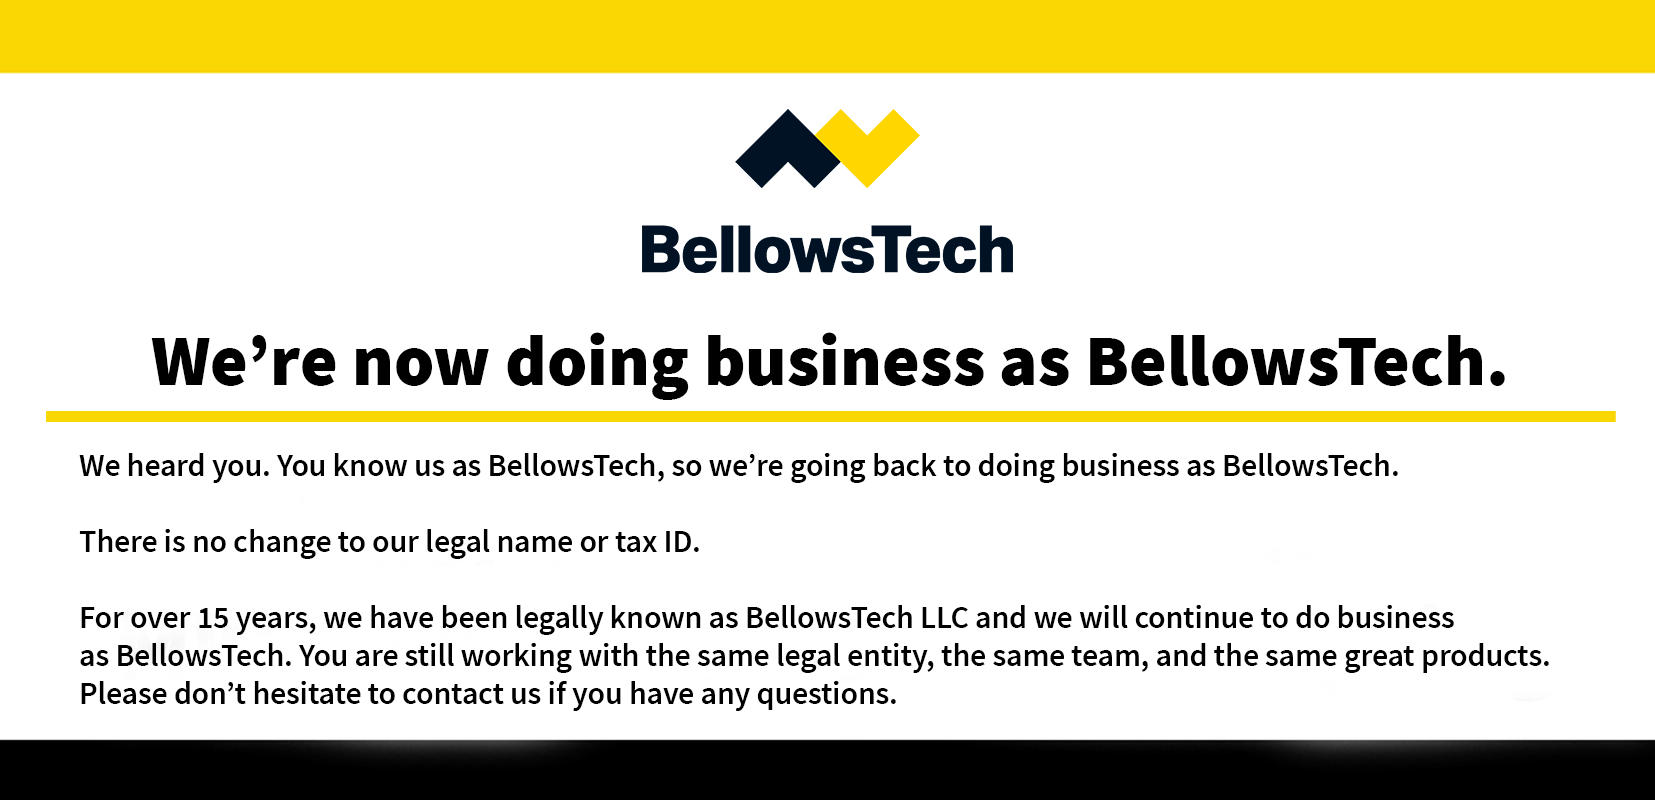 We're now doing business as BellowsTech